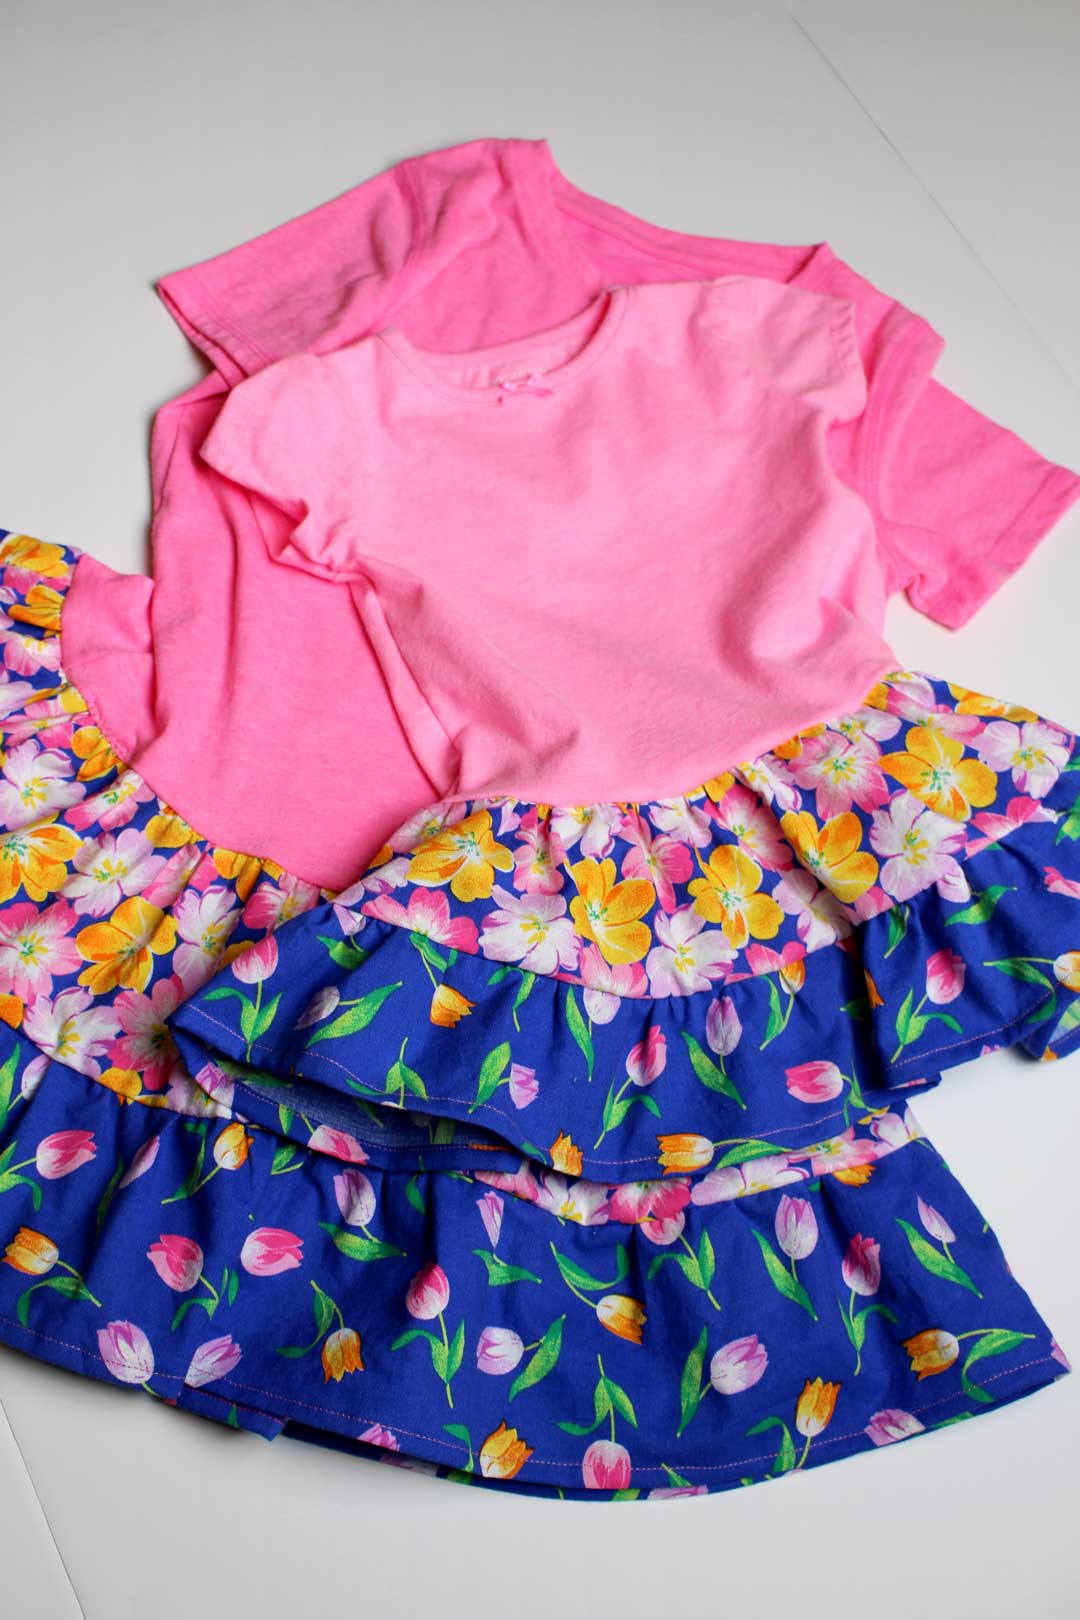 Two pink and floral homemade T-Shirt dresses displayed on a table.